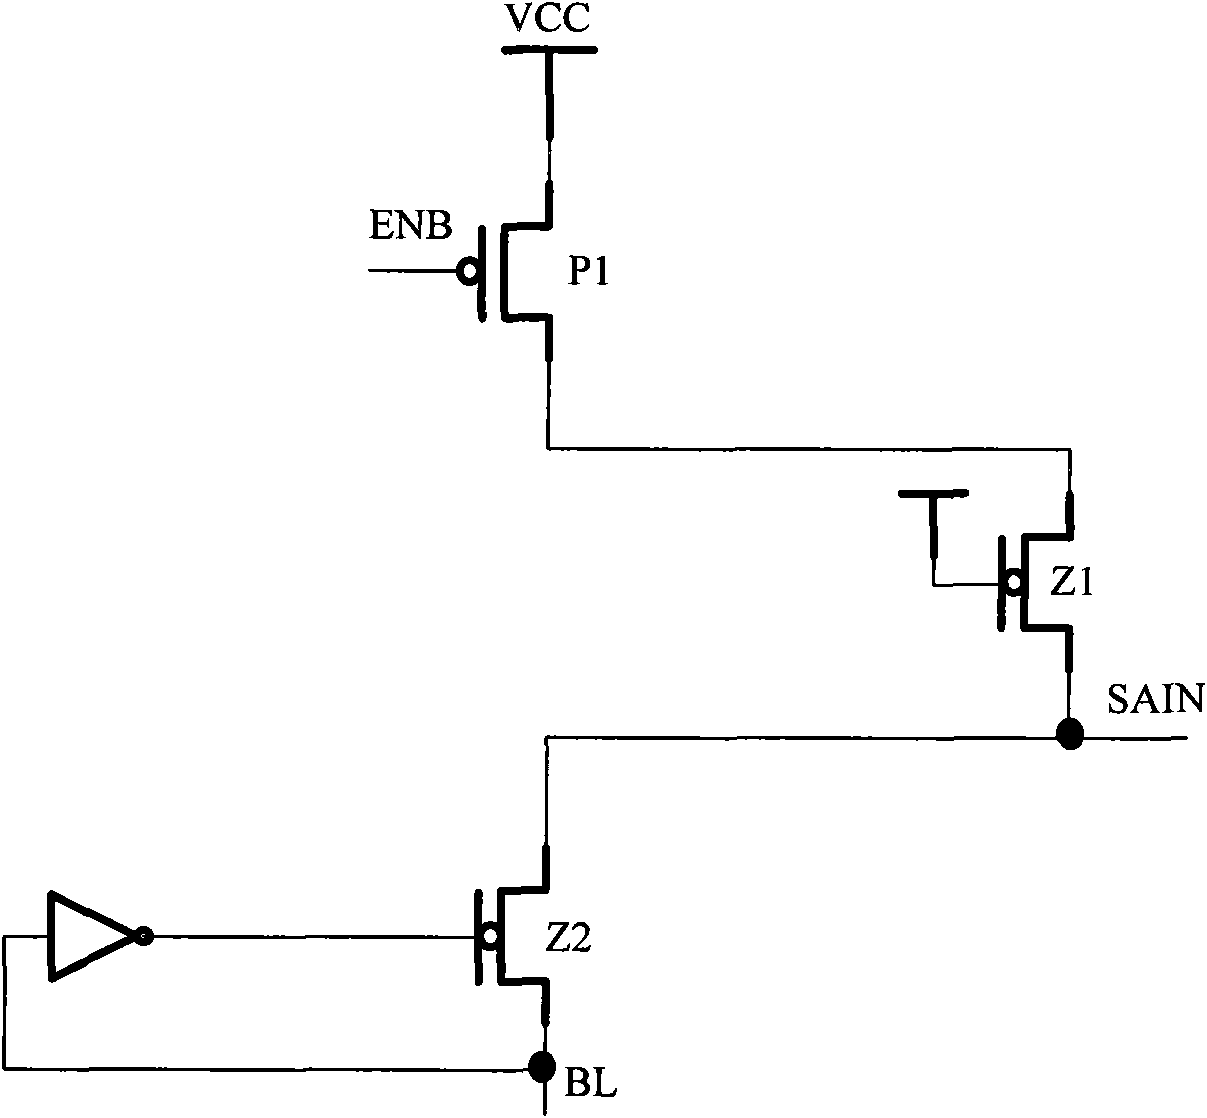 Sense amplifier for MLC flash memory and BL quick-charging circuit